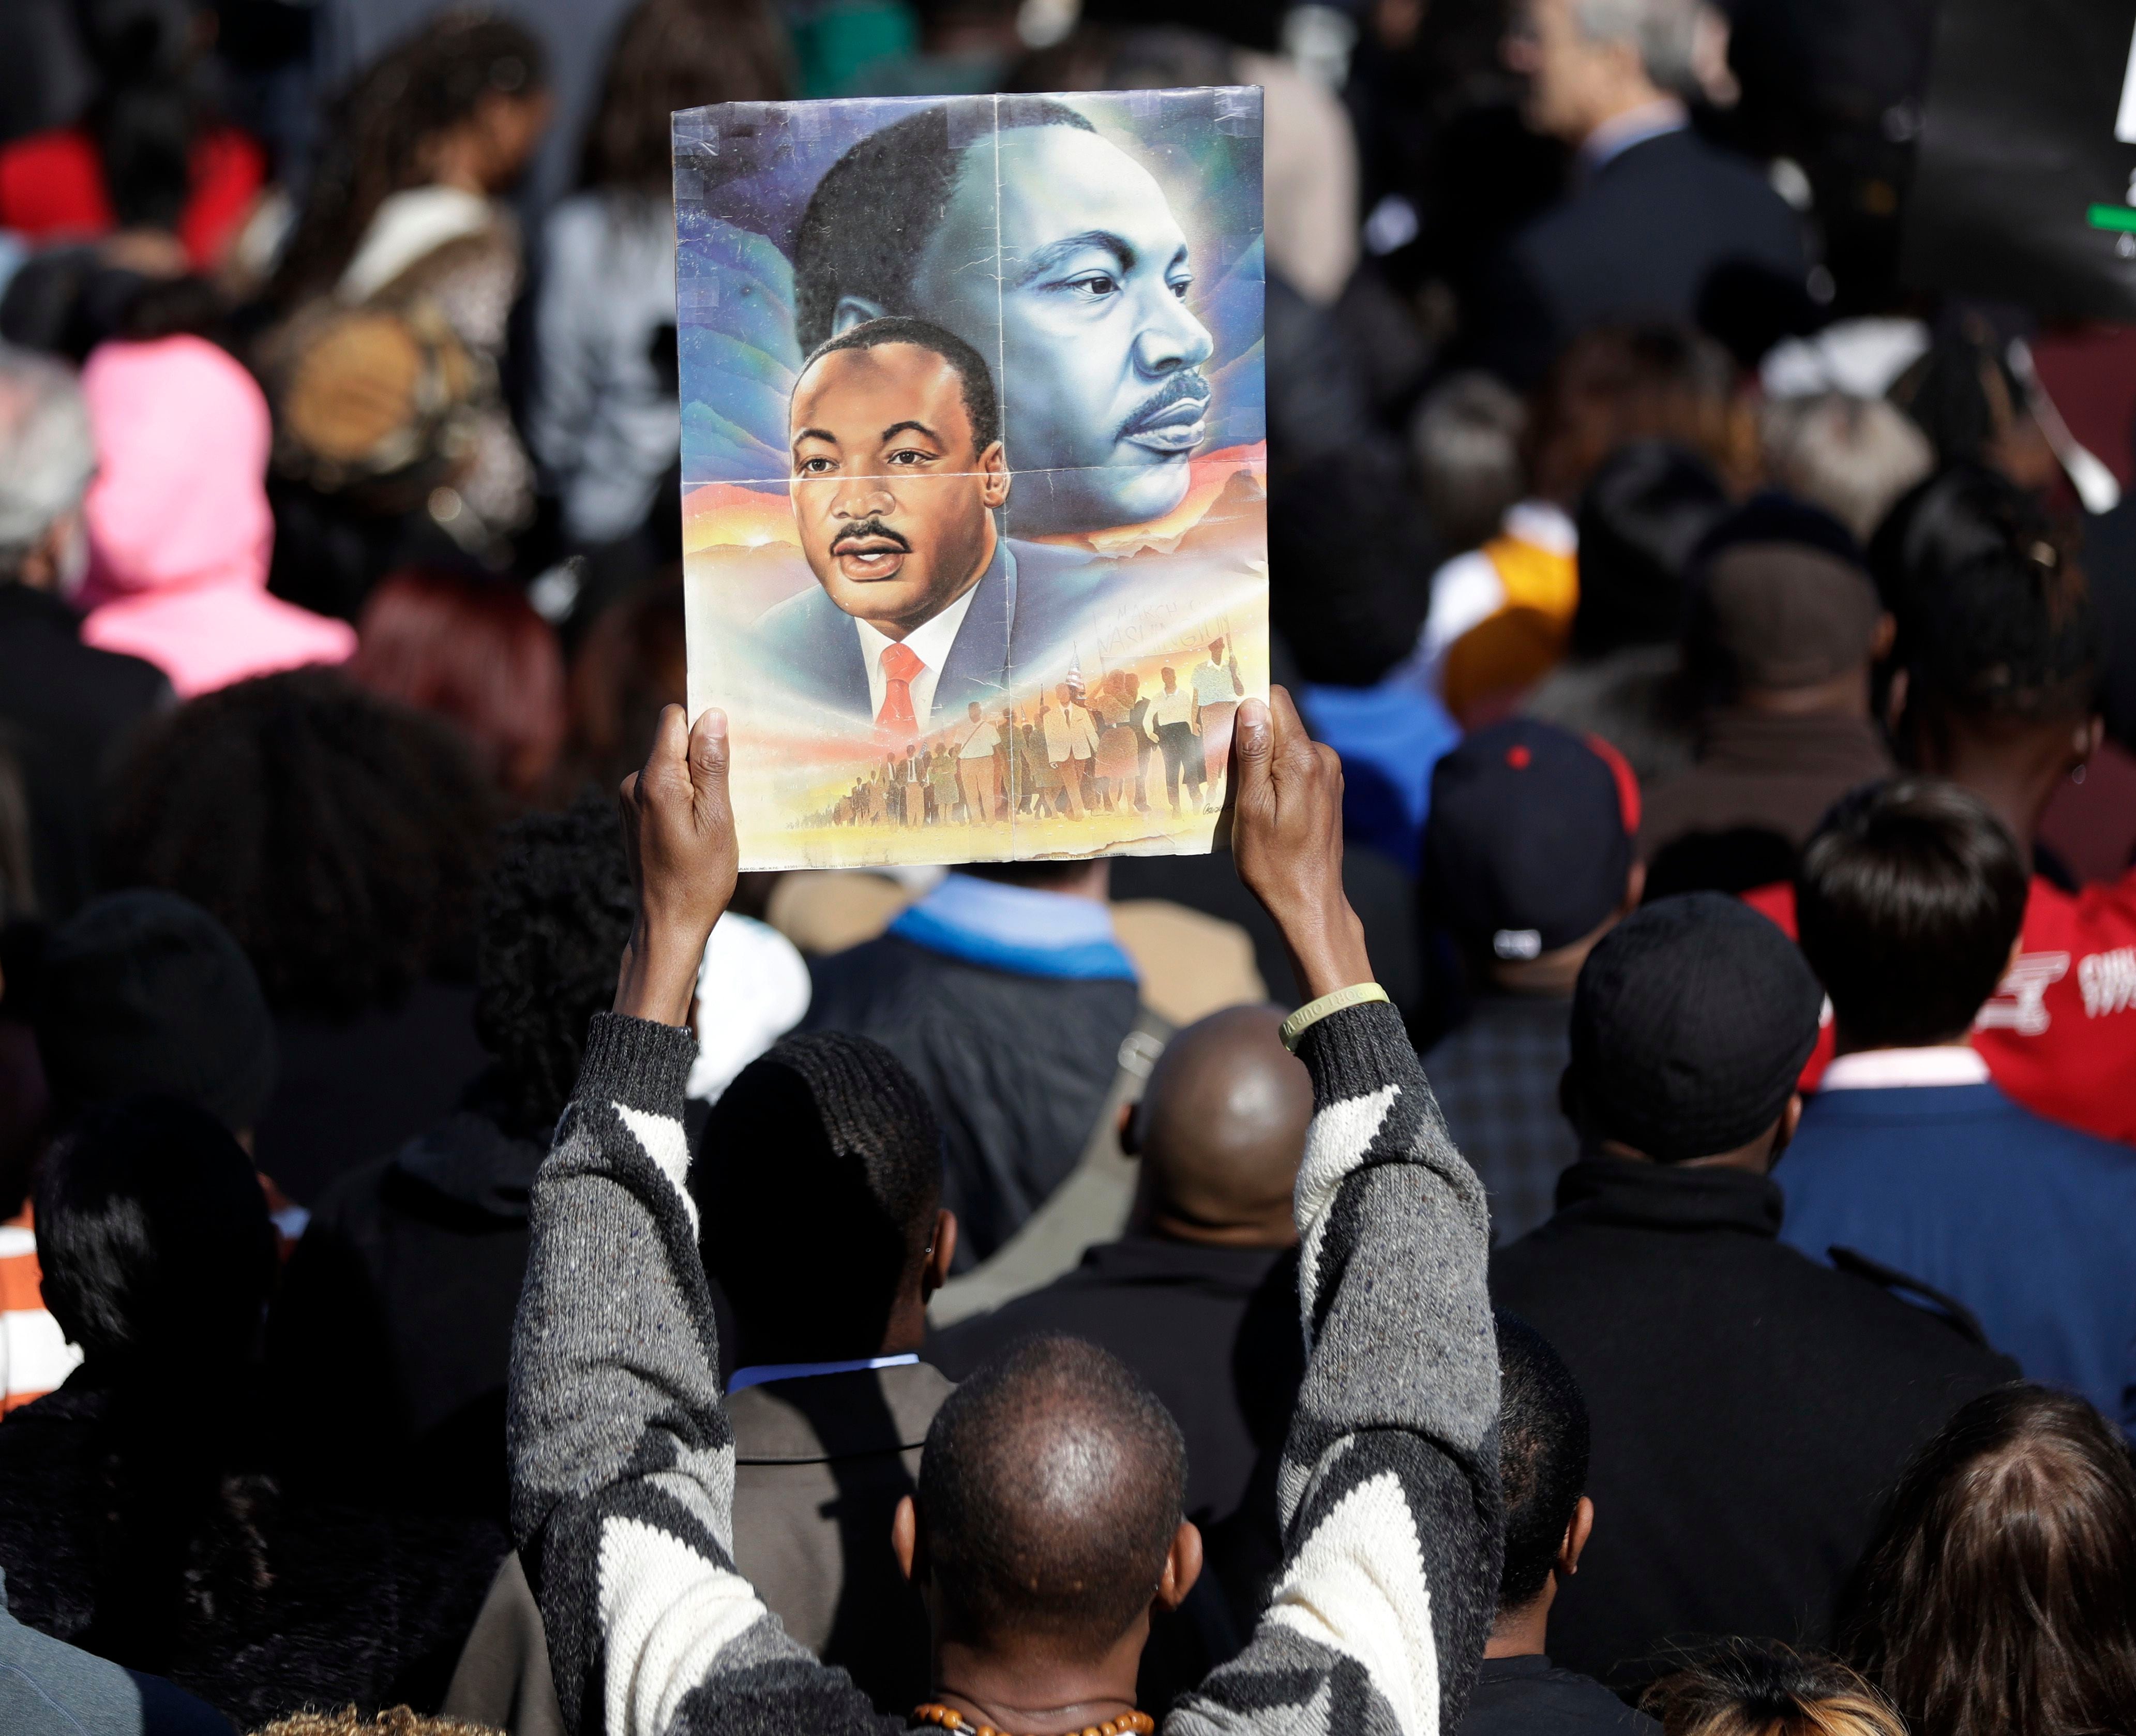 A man holds a poster of Rev. Martin Luther King Jr. as he attends activities at the National Civil Rights Museum, commemorating the 50th anniversary of King's assassination, Wednesday, April 4, 2018, in Memphis, Tenn. King was assassinated April 4, 1968, while in Memphis supporting striking sanitation workers. (AP Photo/Mark Humphrey)